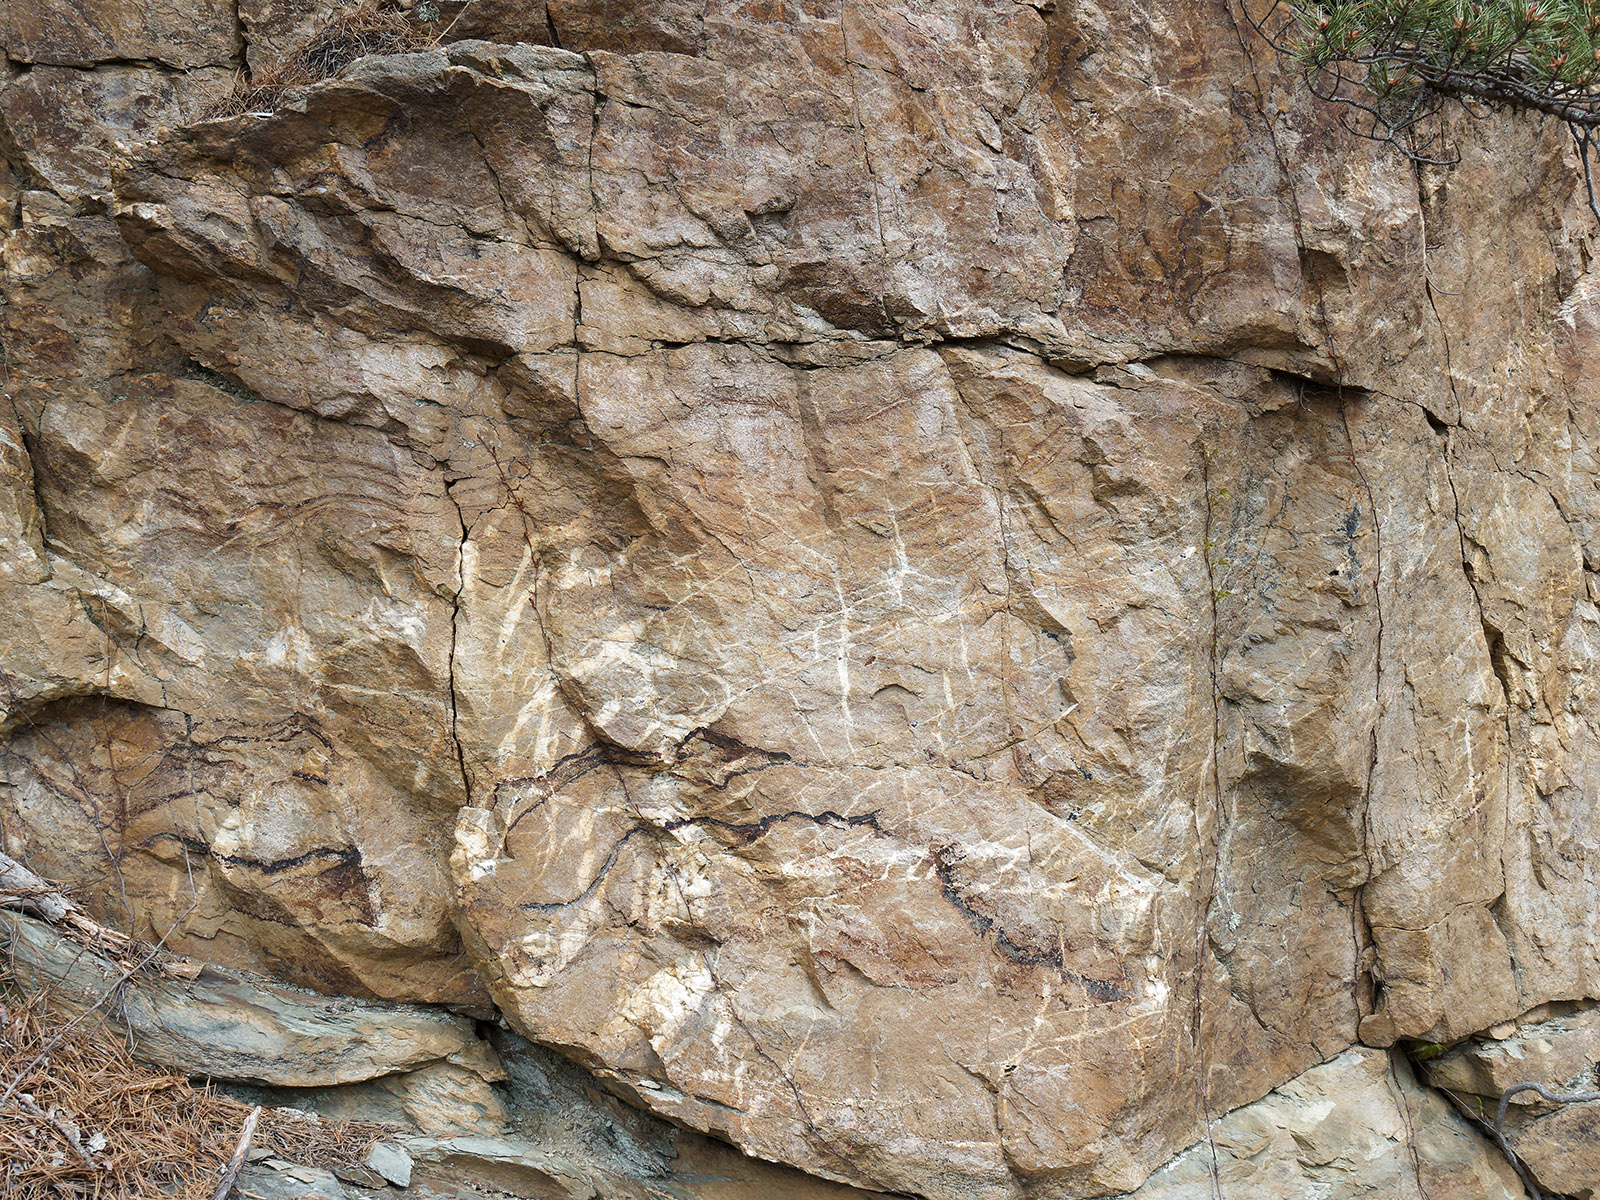 Weverton Formation sandstone with veins of quartz in road cut next to Sawmill Ridge overlook.